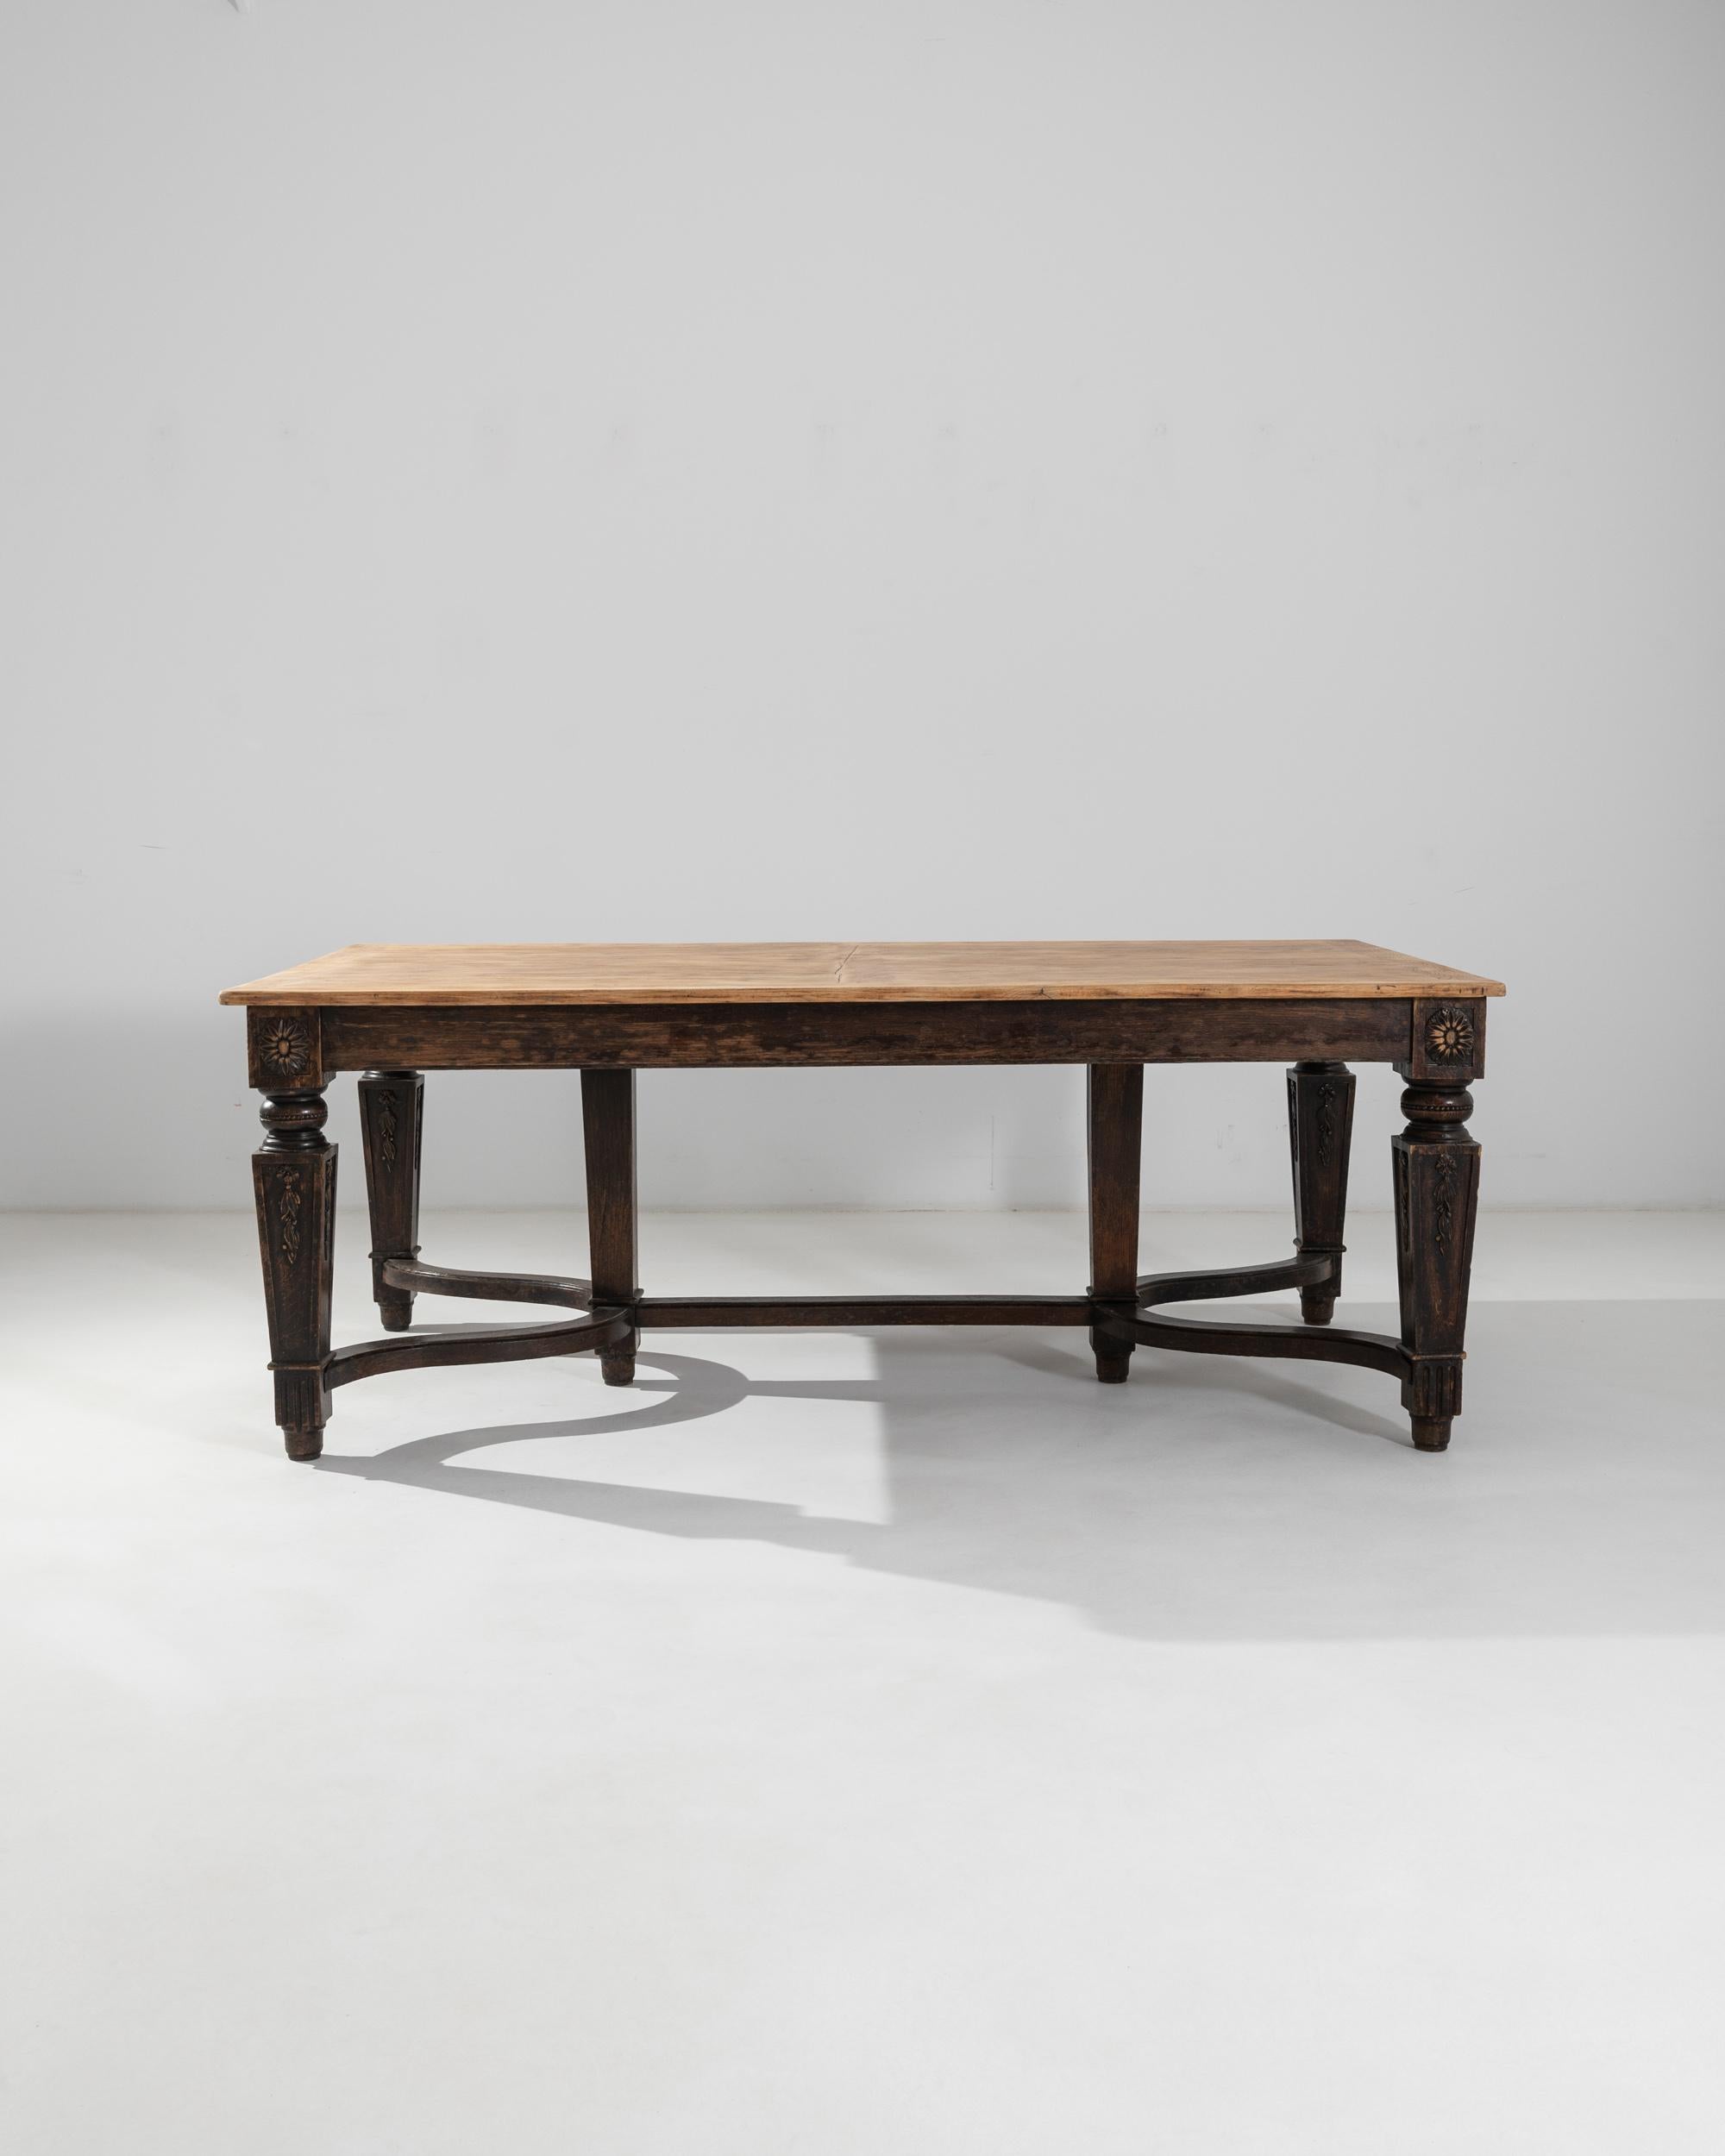 A 1900s French dining table made from oak. Hearty and expertly crafted, this expansive table emits a rich and warm glow and provides a generous tabletop to assemble a feast. The understructure of this table is composed of gracefully curved supports